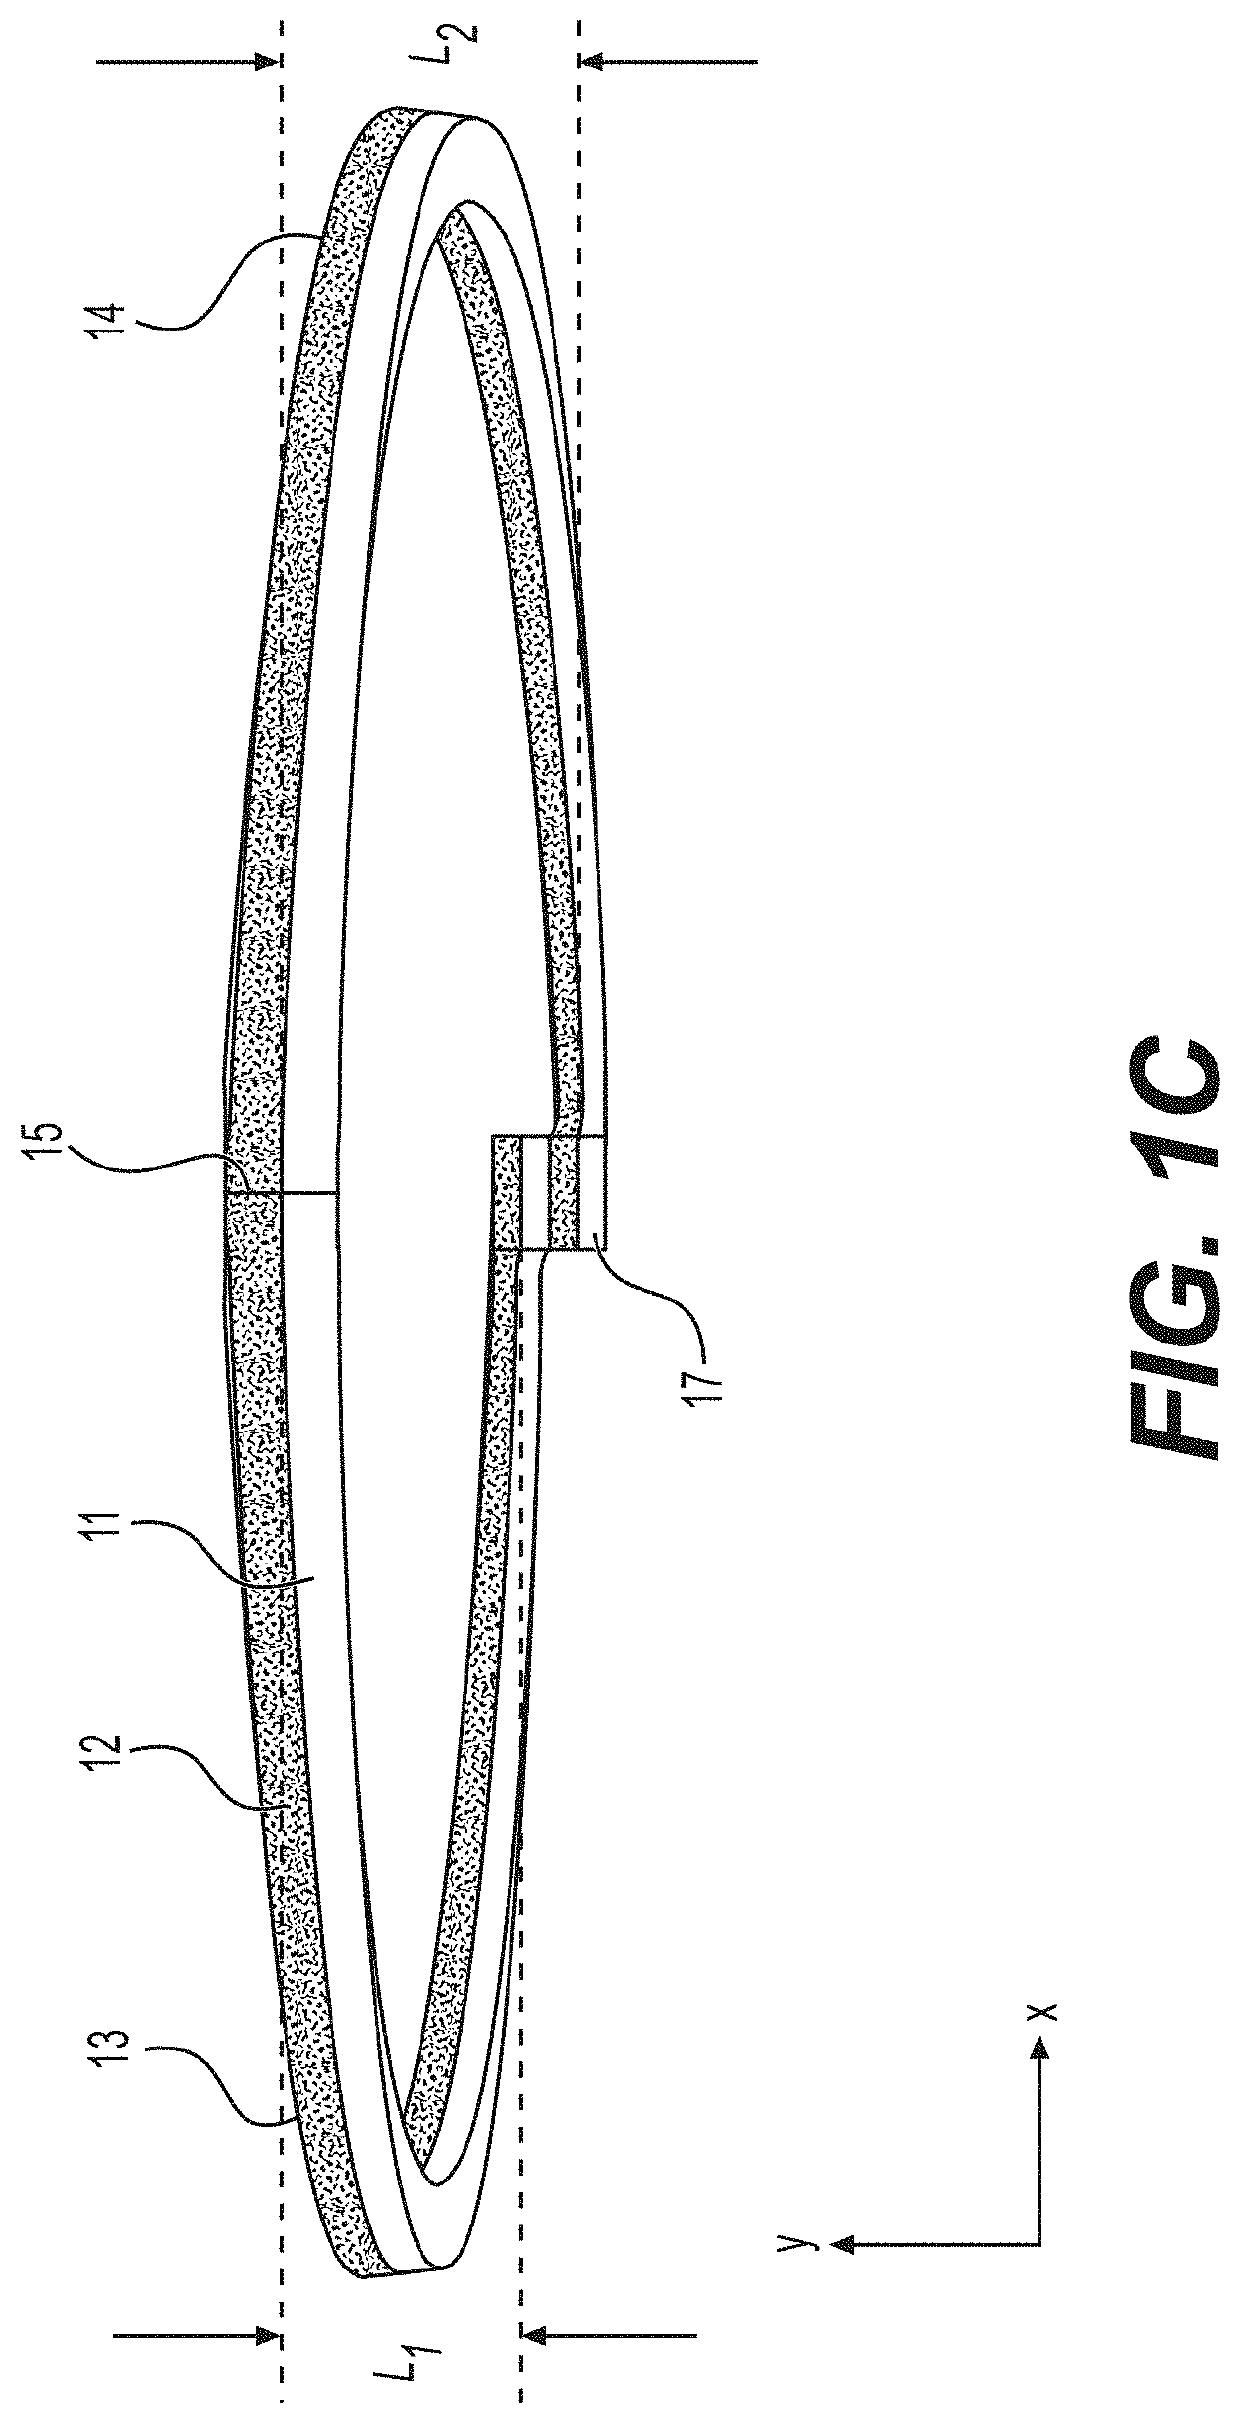 Methods for Generating Interfacial Surfaces and Devices Therefor